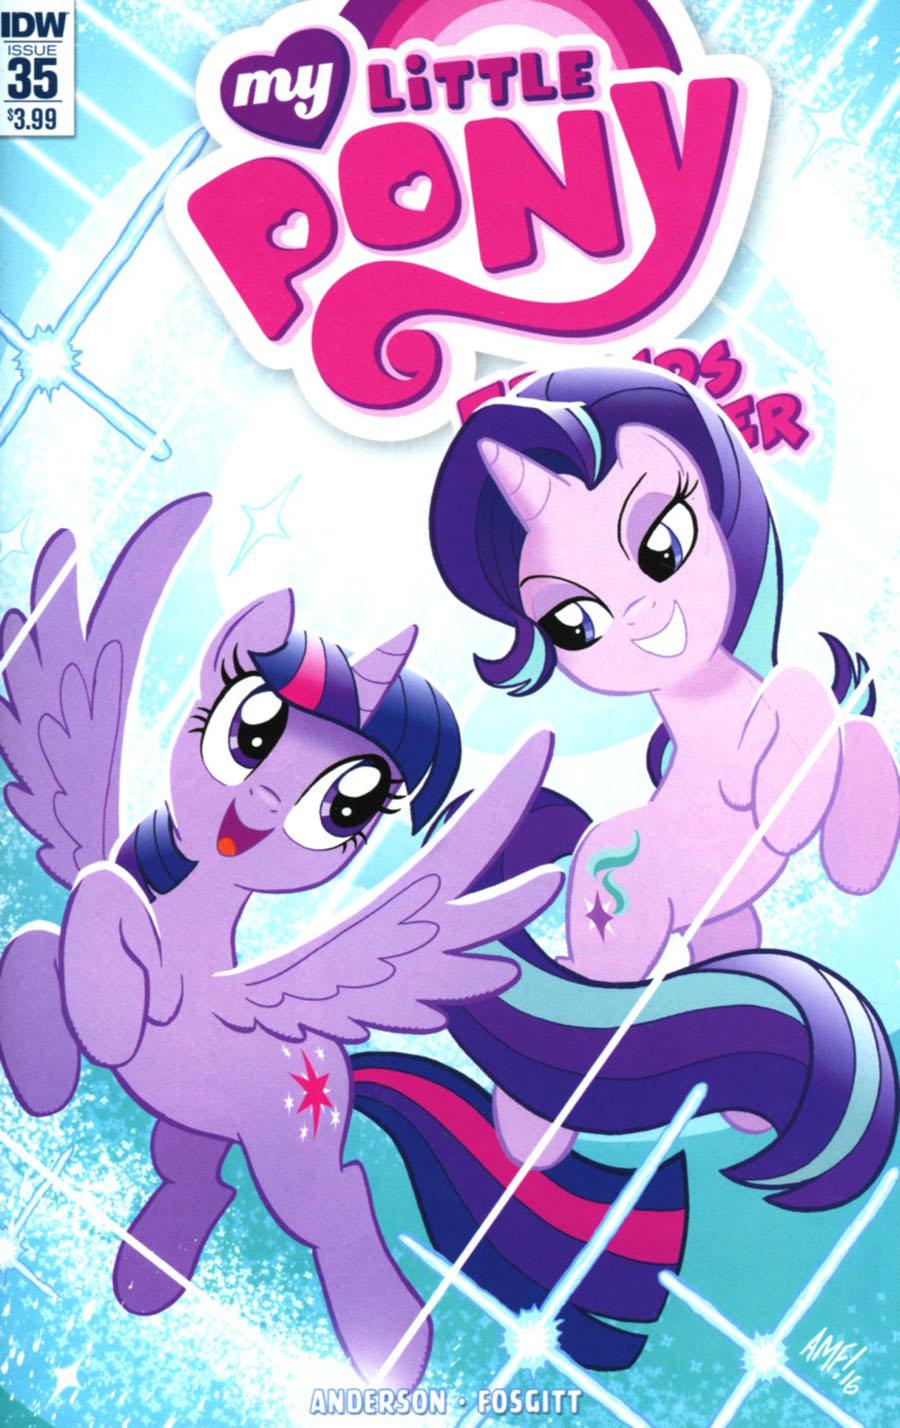 My Little Pony Friends Forever Vol. 1 #35